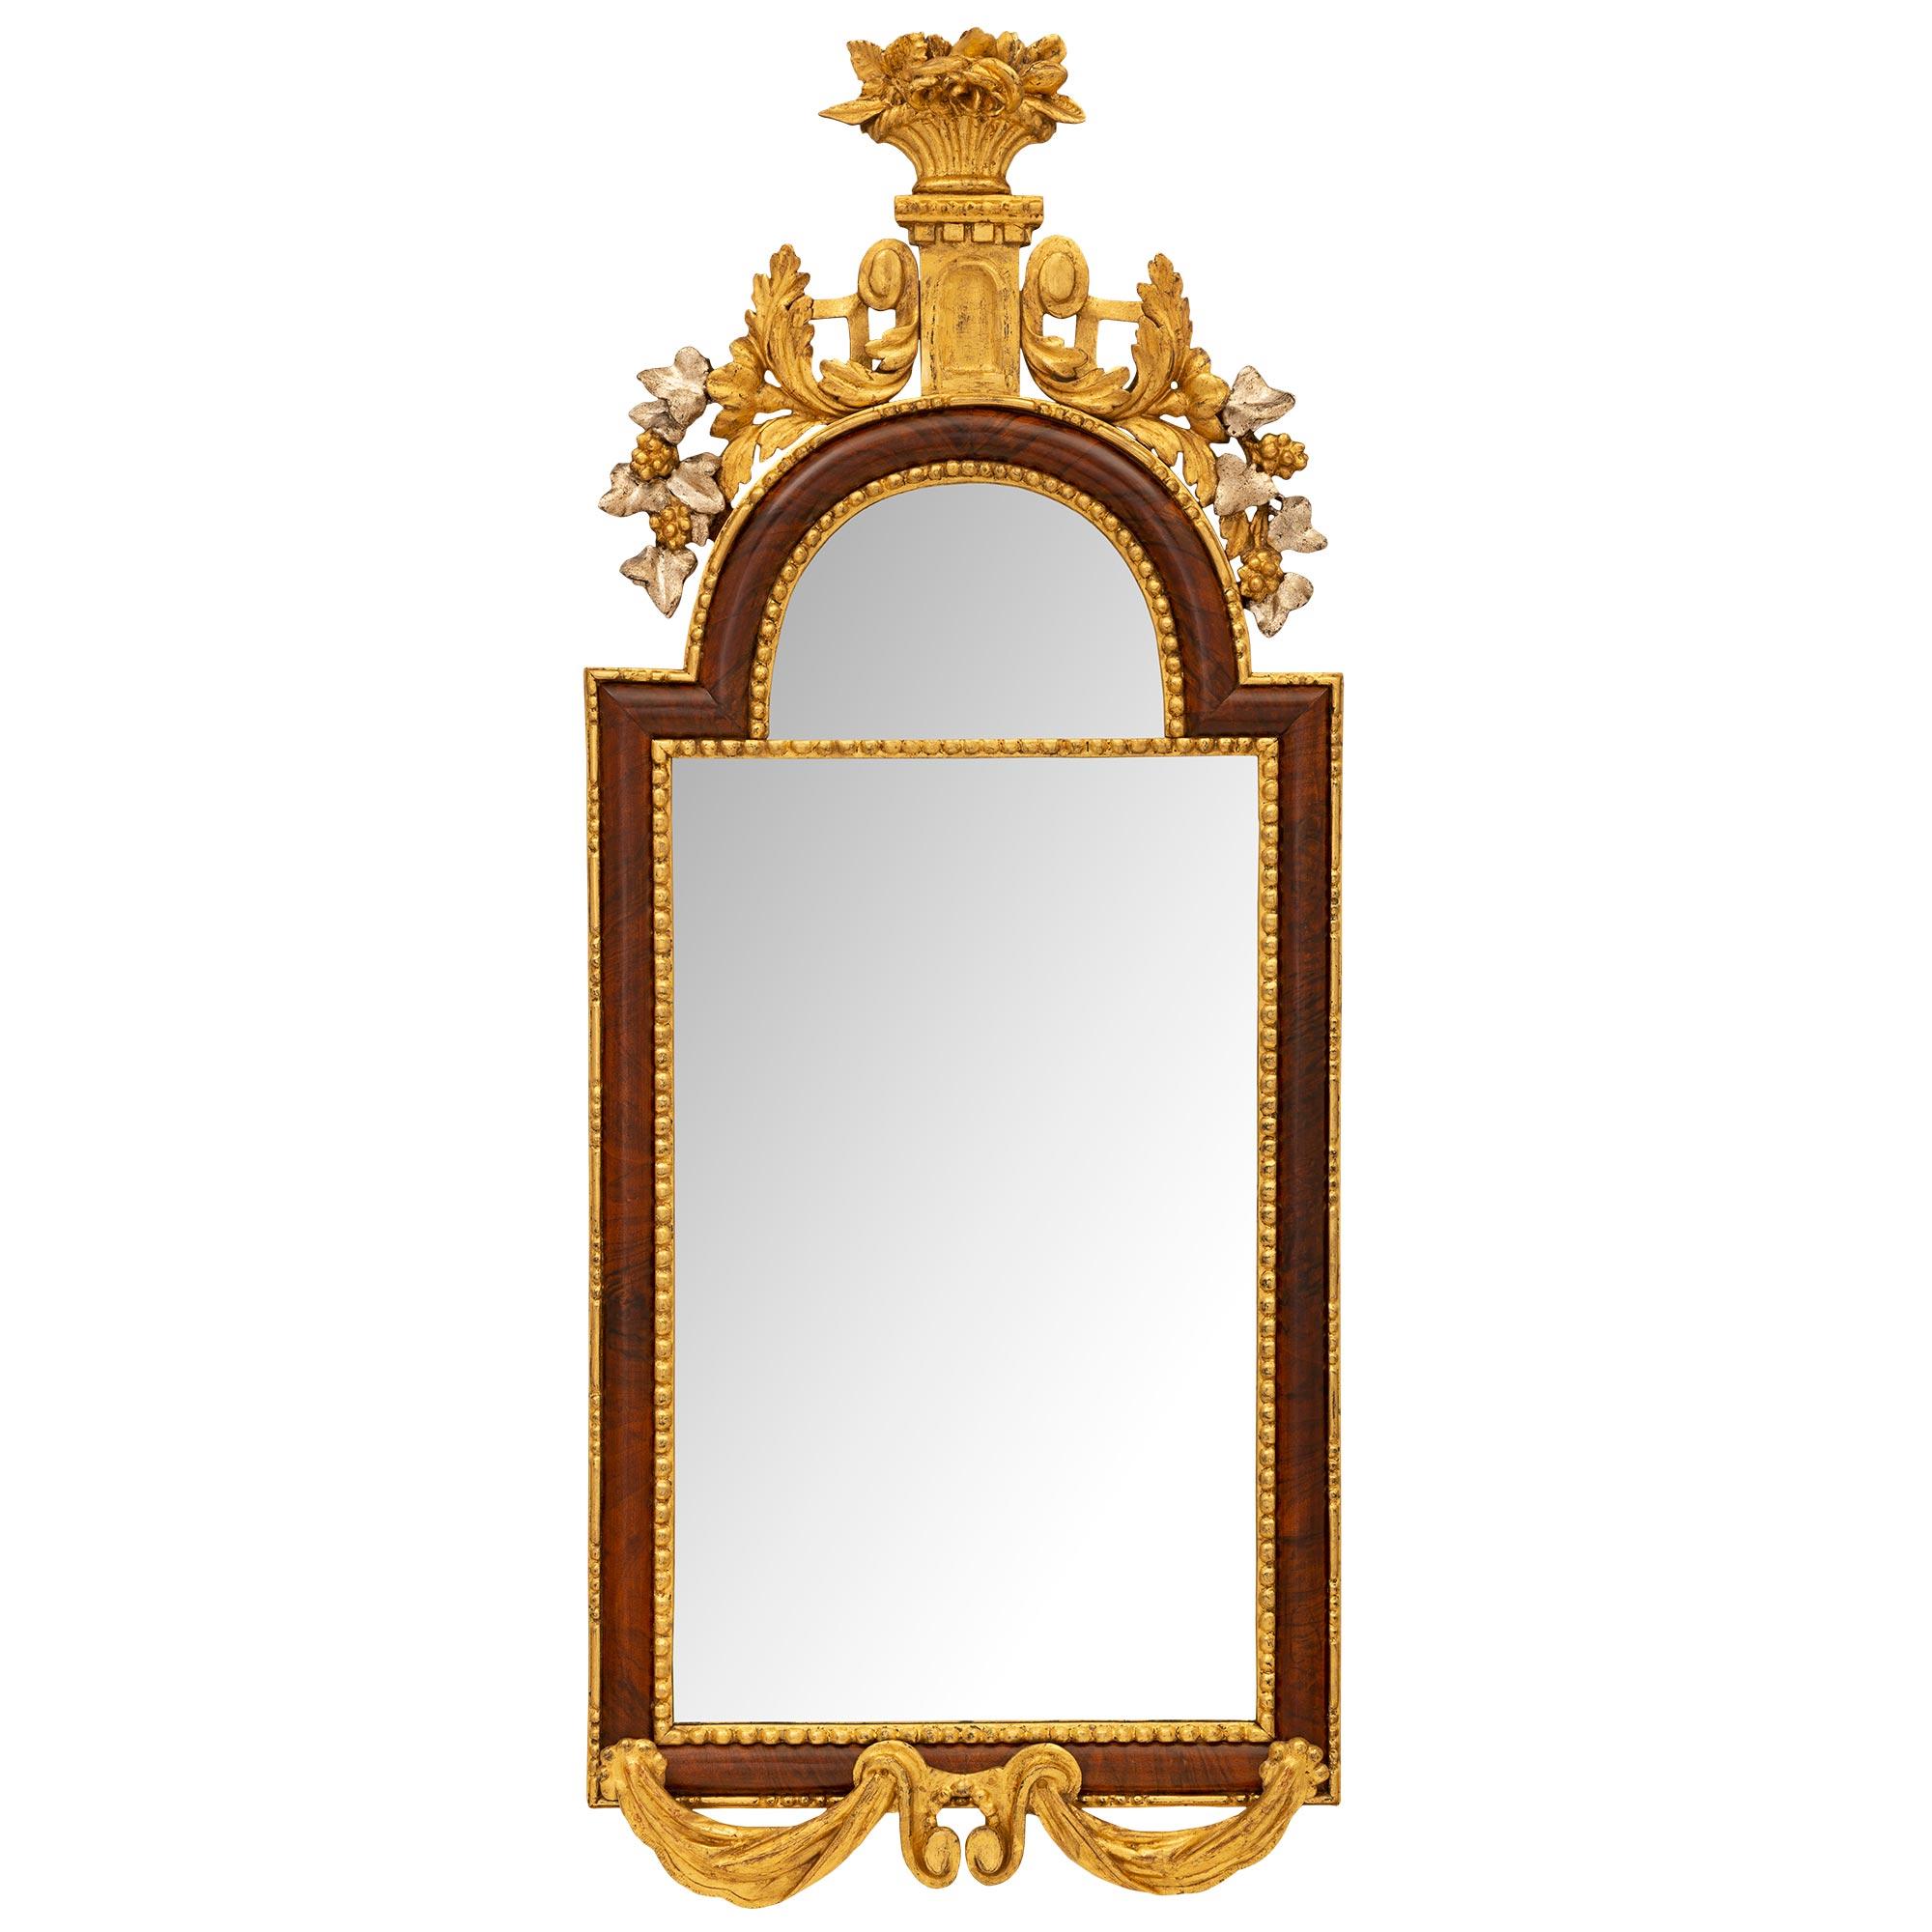 German 18th Century Neo-Classical Period Burl Walnut, Giltwood and Mecca Mirror For Sale